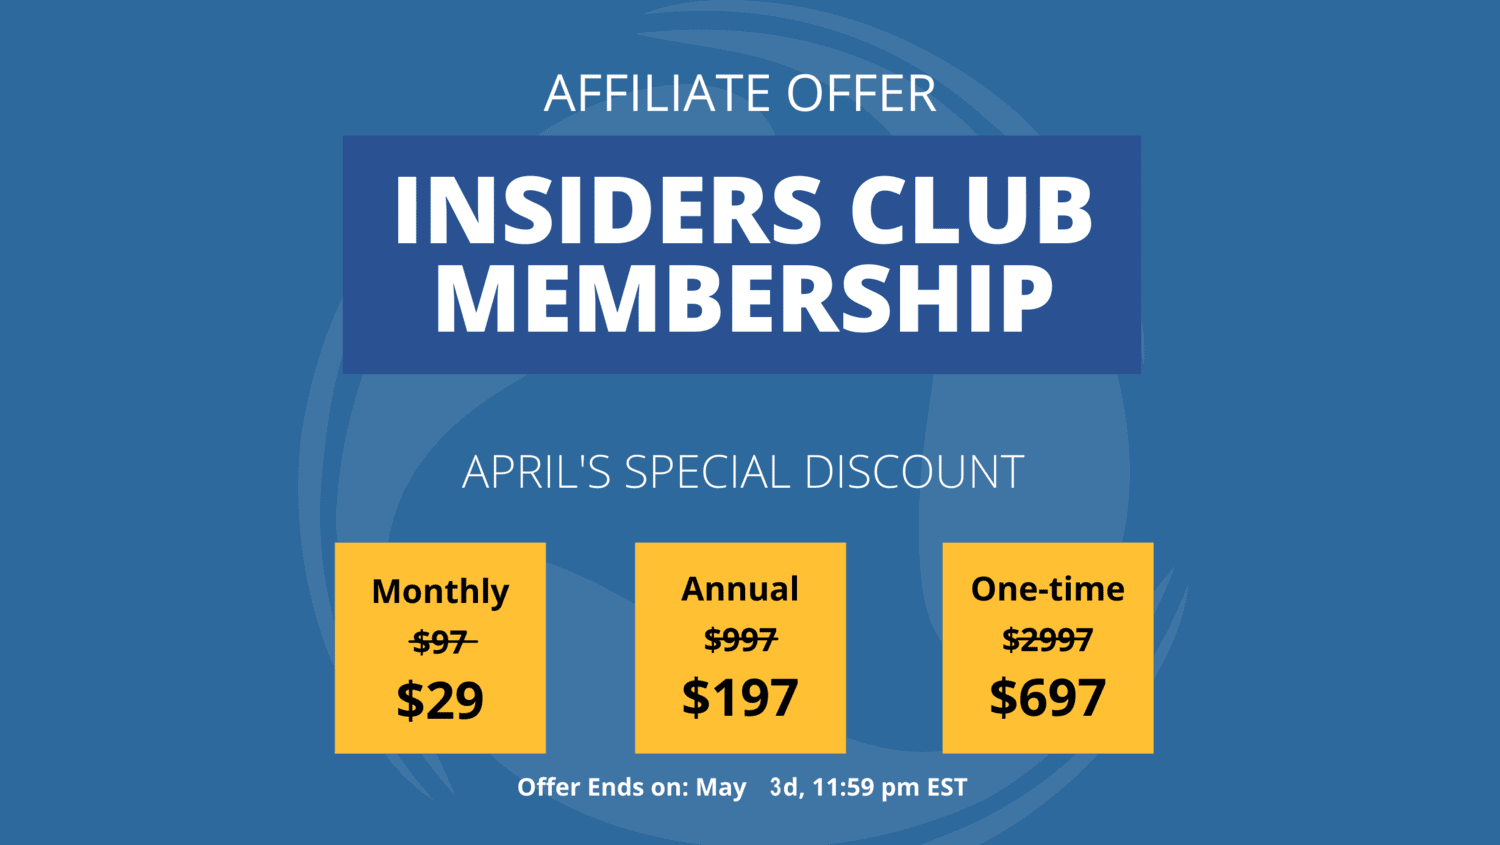 Affiliate Offer insiders price